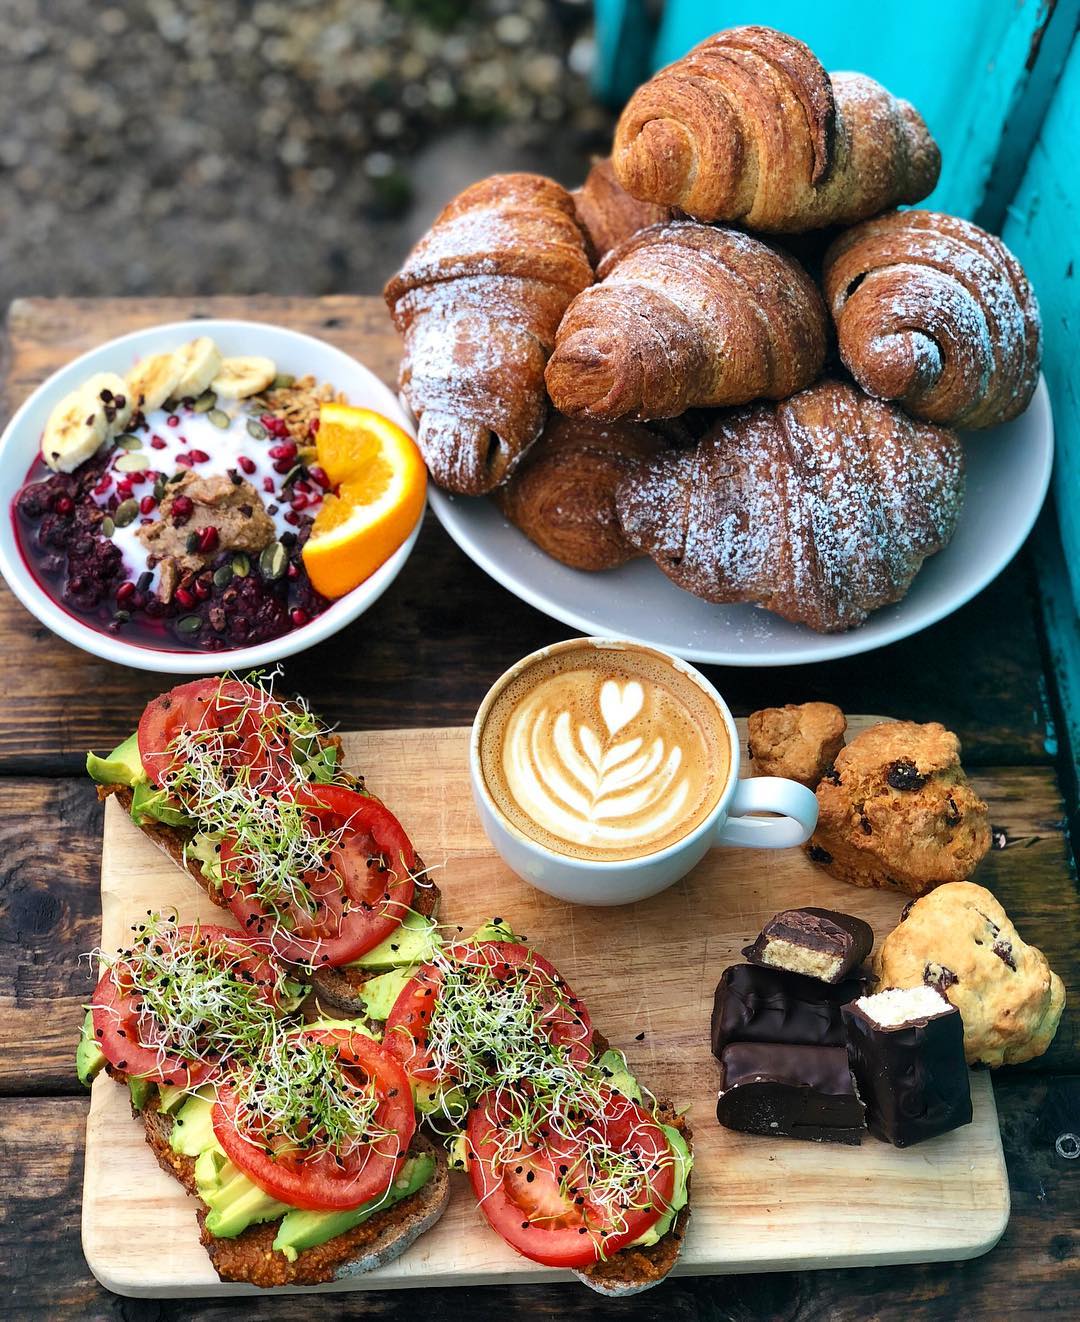 A selection of delicious vegan breakfast options